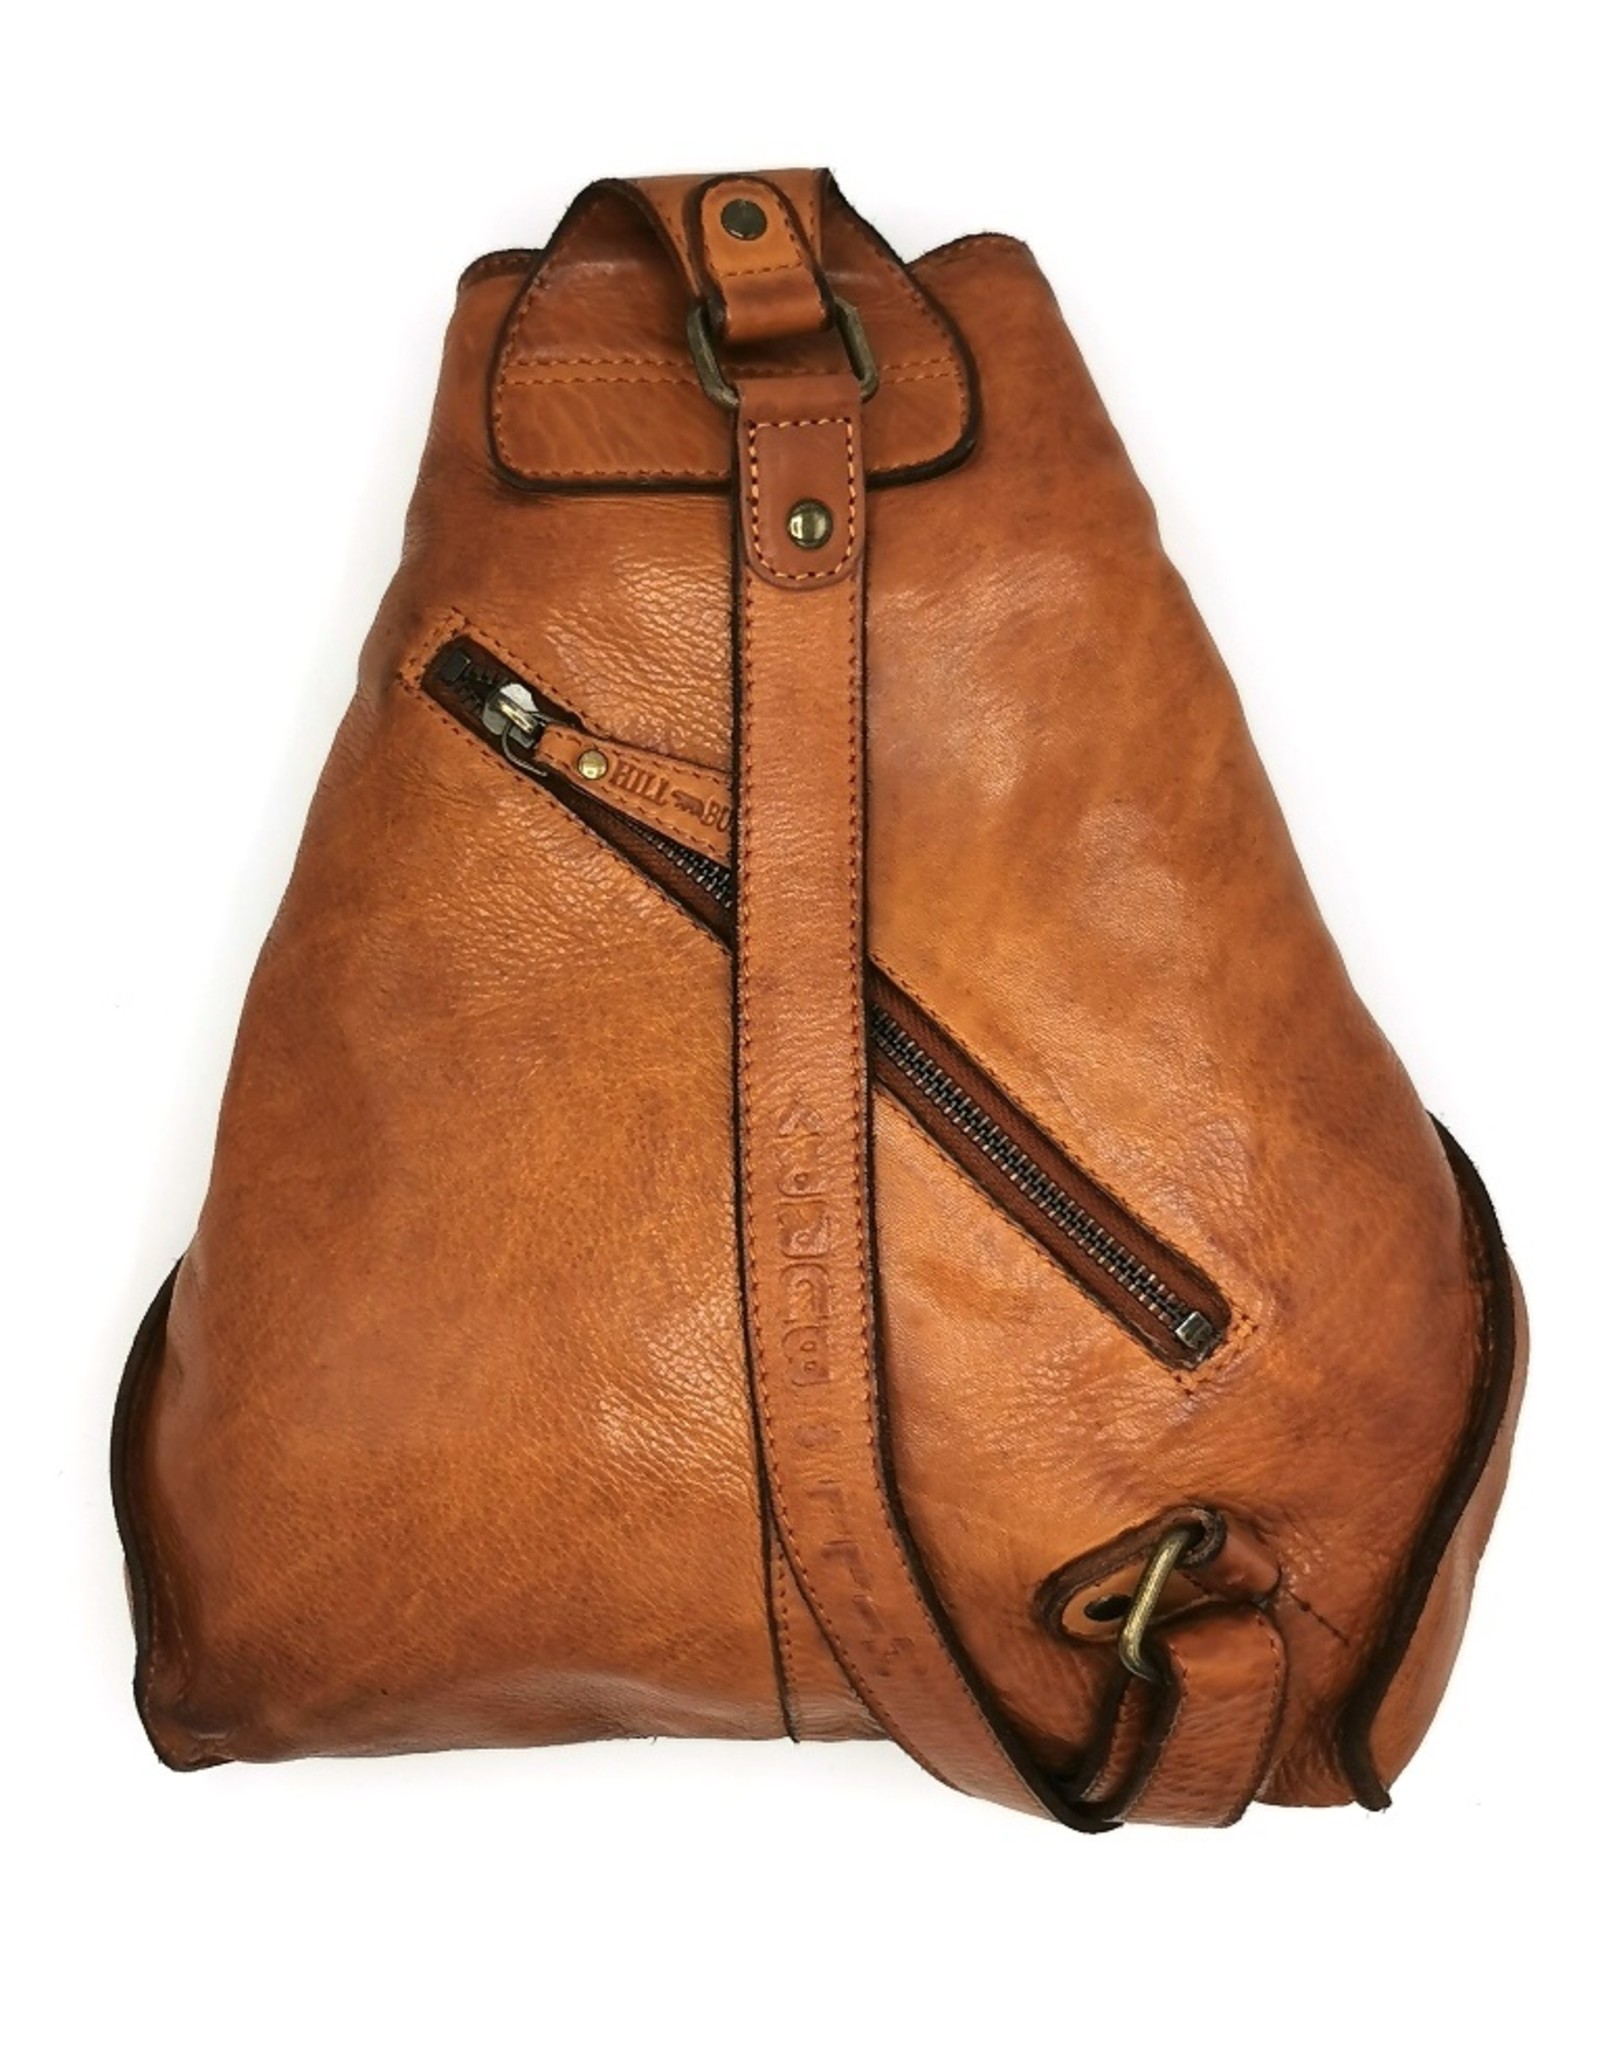 HillBurry Leather backpacks Leather shoppers - HillBurry Crossbody-Sling bag Washed Leather tan